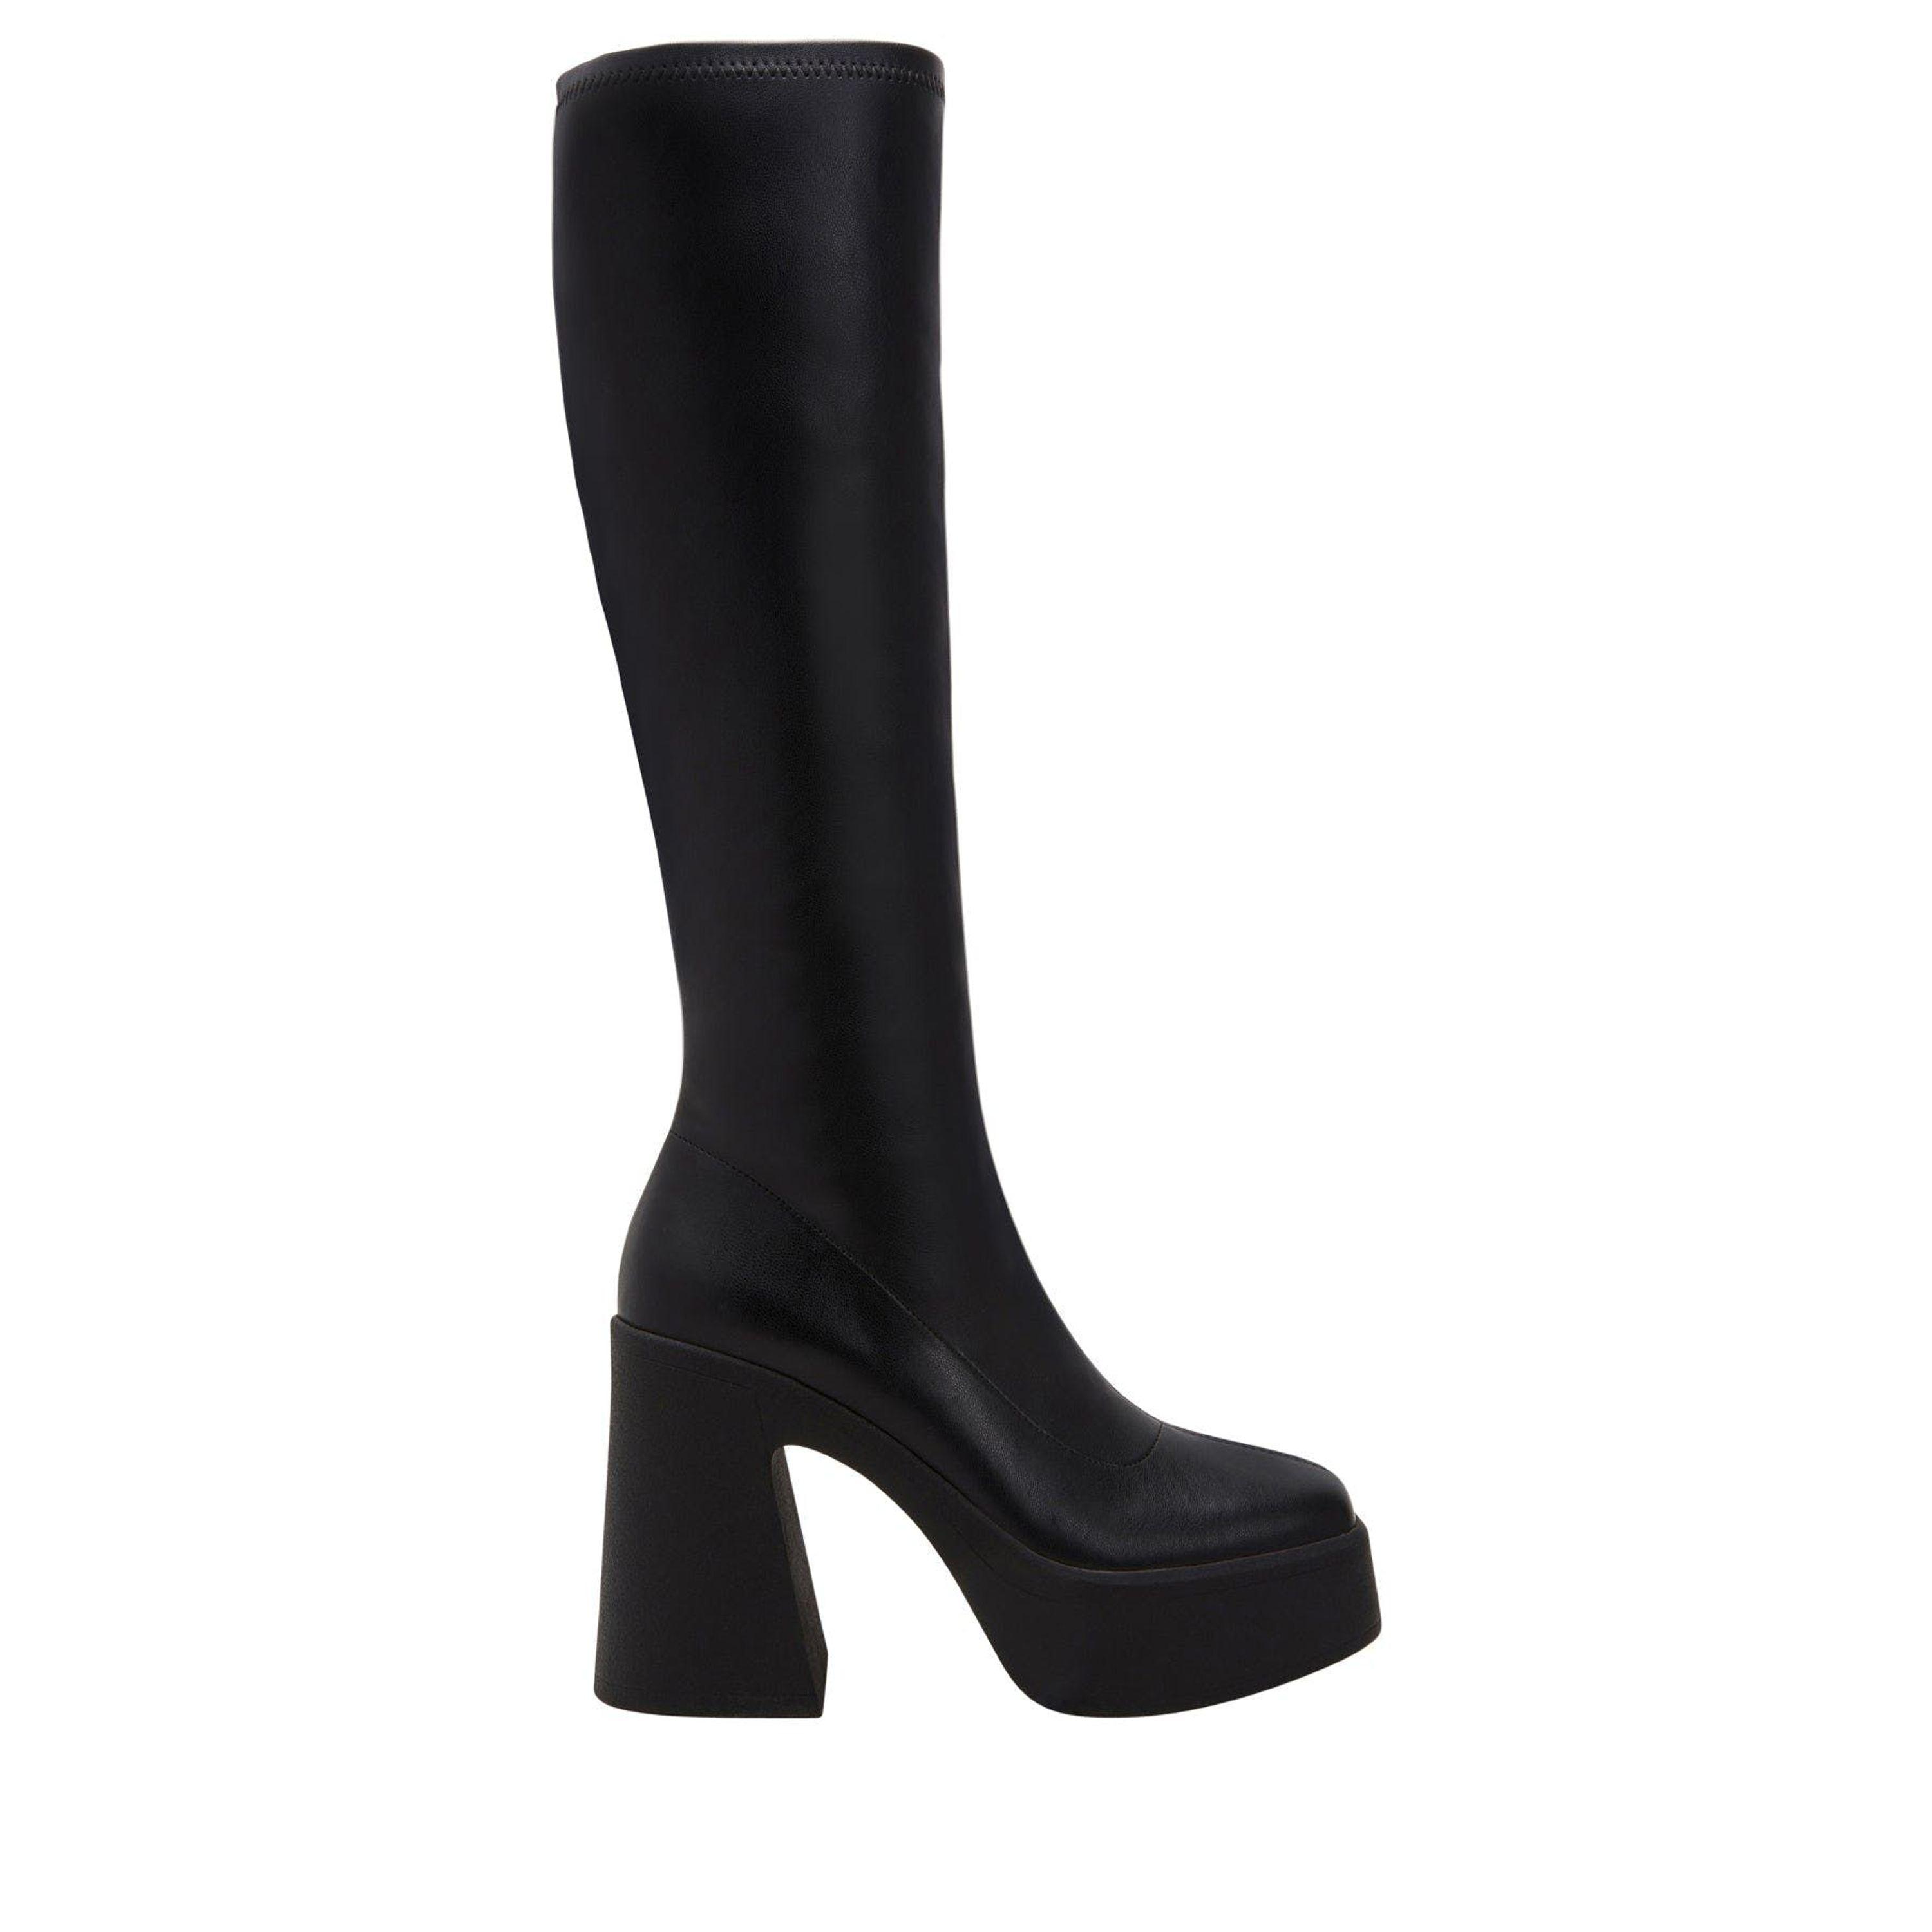 Katy Perry The Heightten Stretch Boot in Black | Lyst